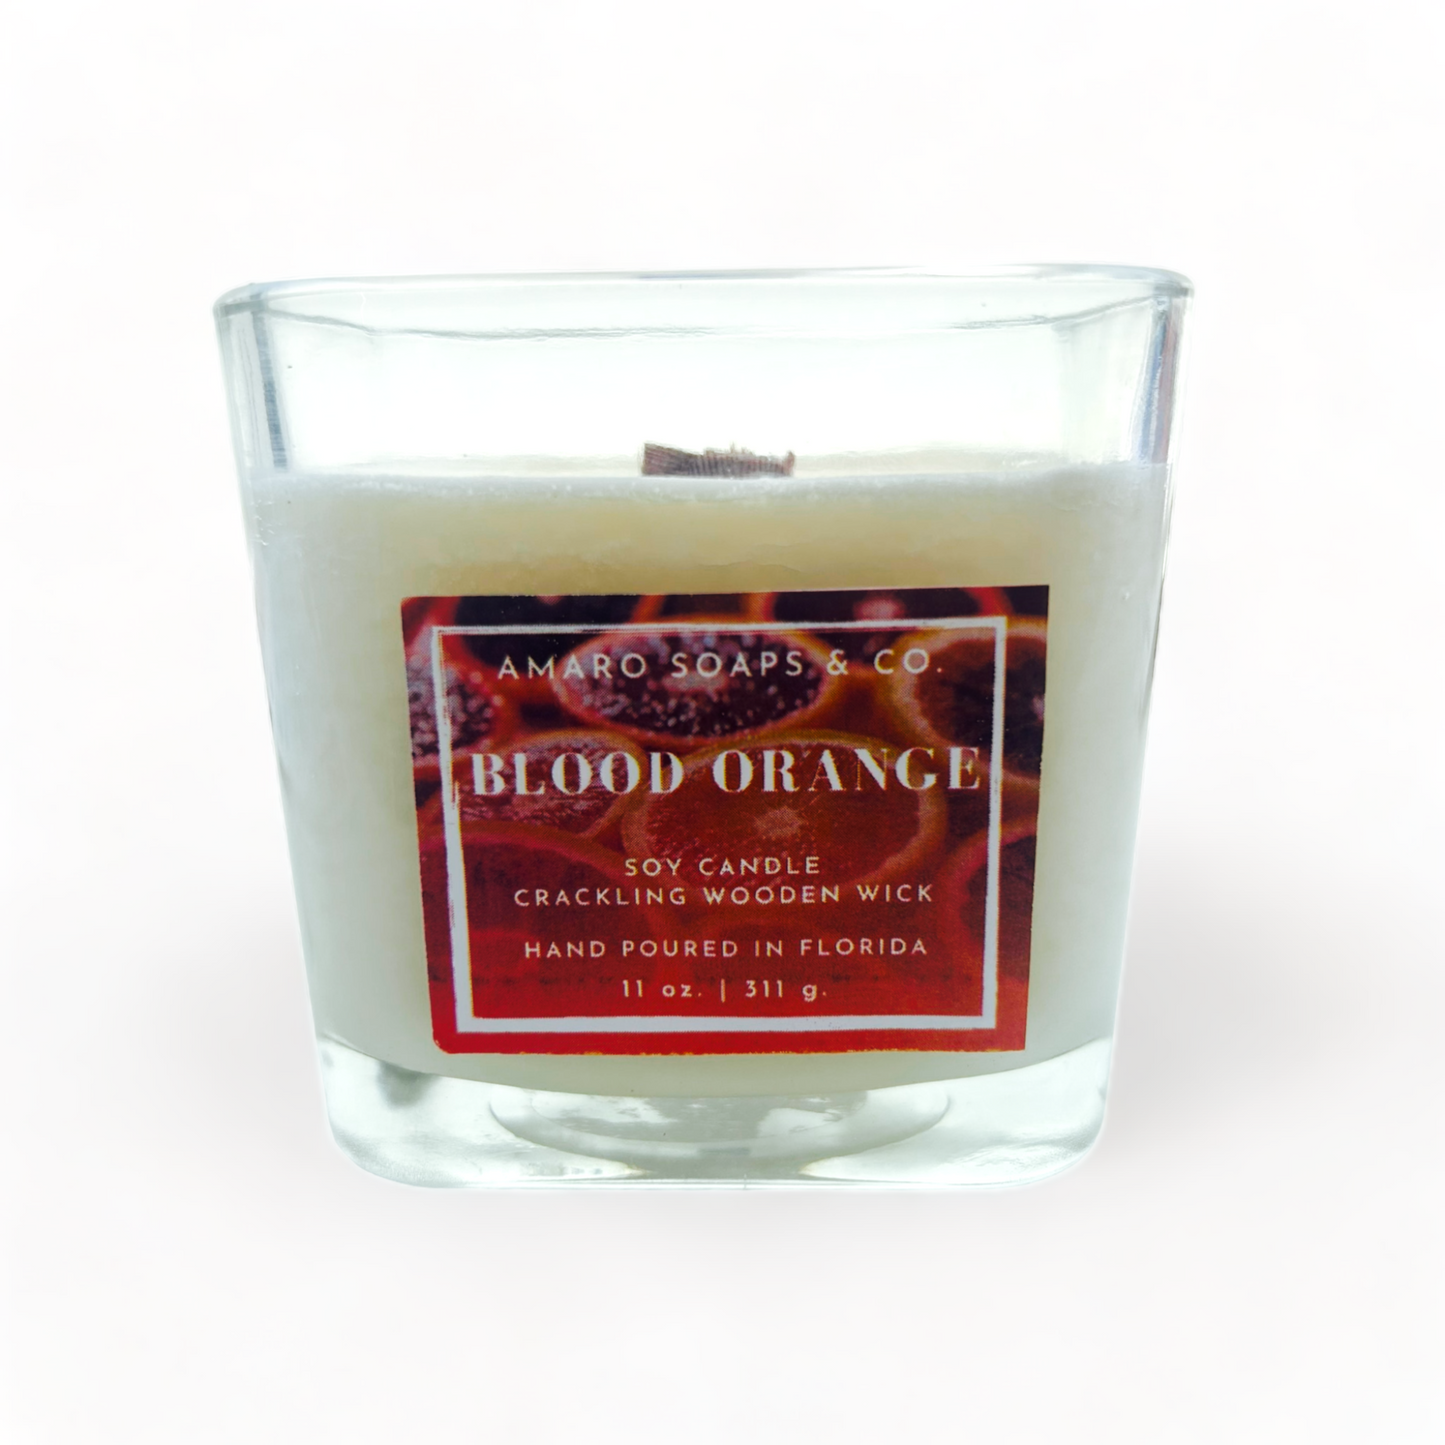 Blood Orange Wooden Wick Soy Candle